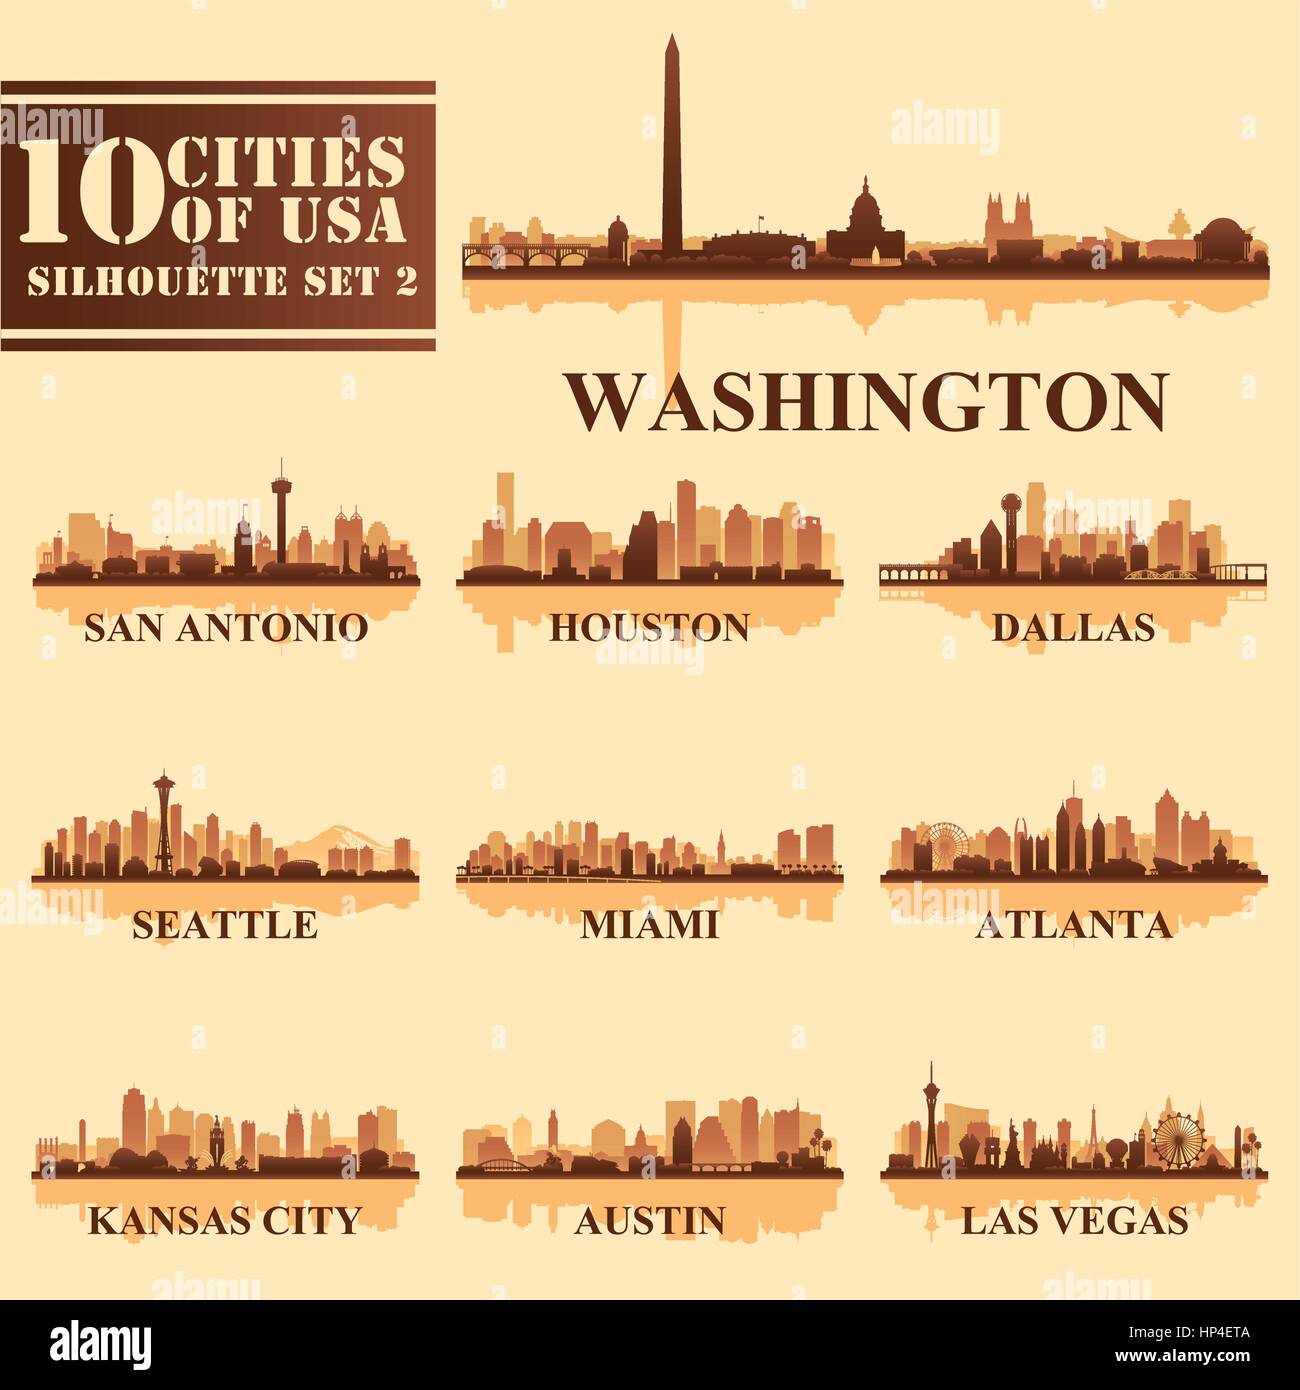 Silhouette city set of USA 2. Vector illustration Stock Vector